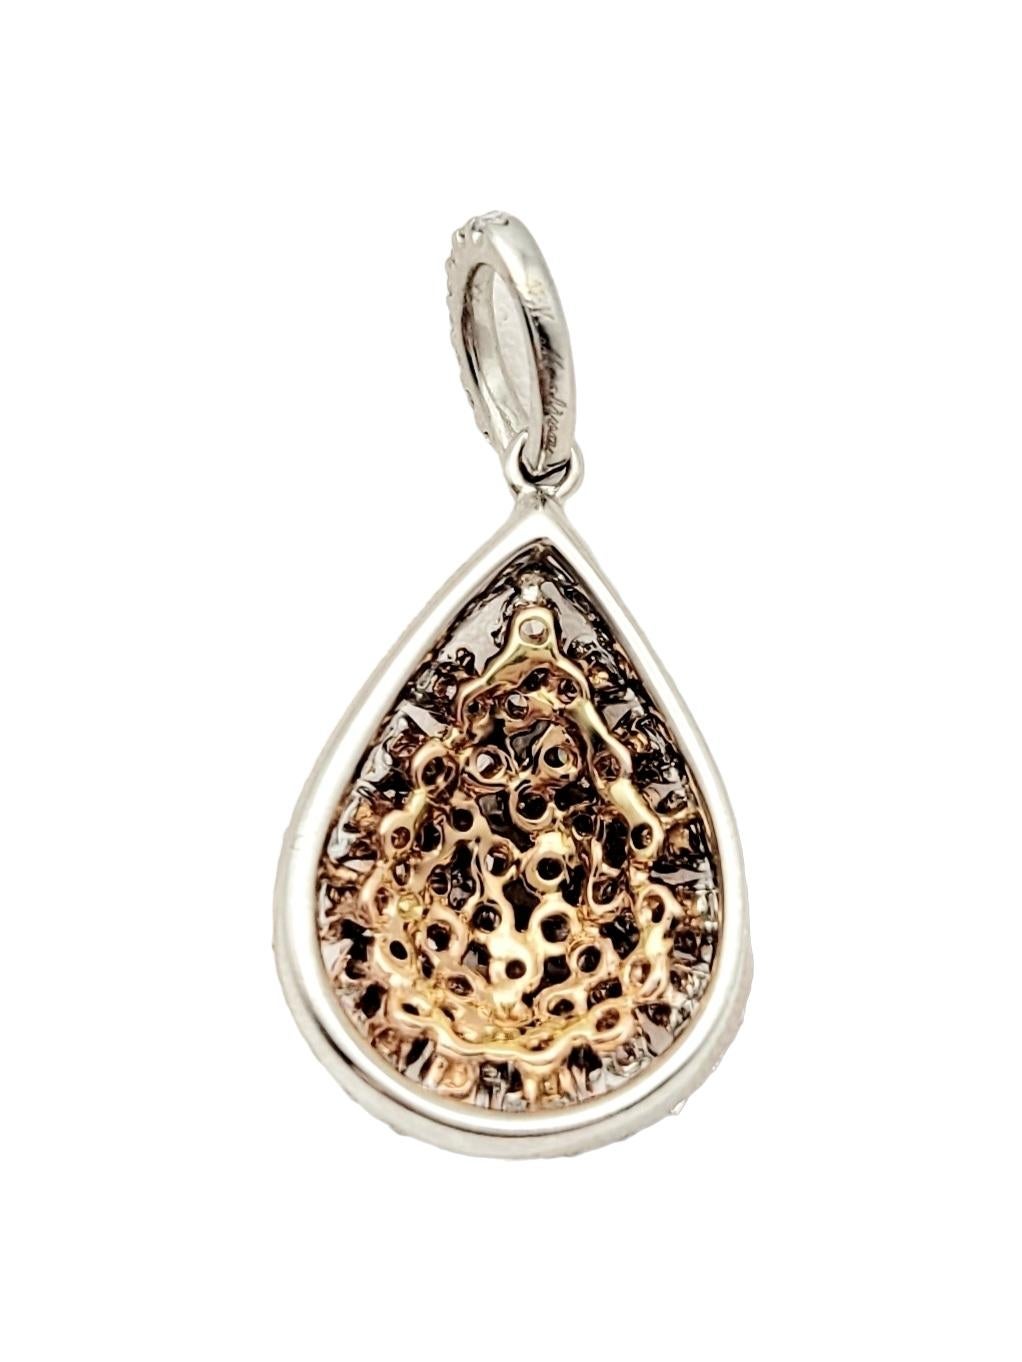 Fancy Pink Diamond Teardrop Pendant with Halo in 18 Karat Rose and White Gold In Good Condition For Sale In Scottsdale, AZ